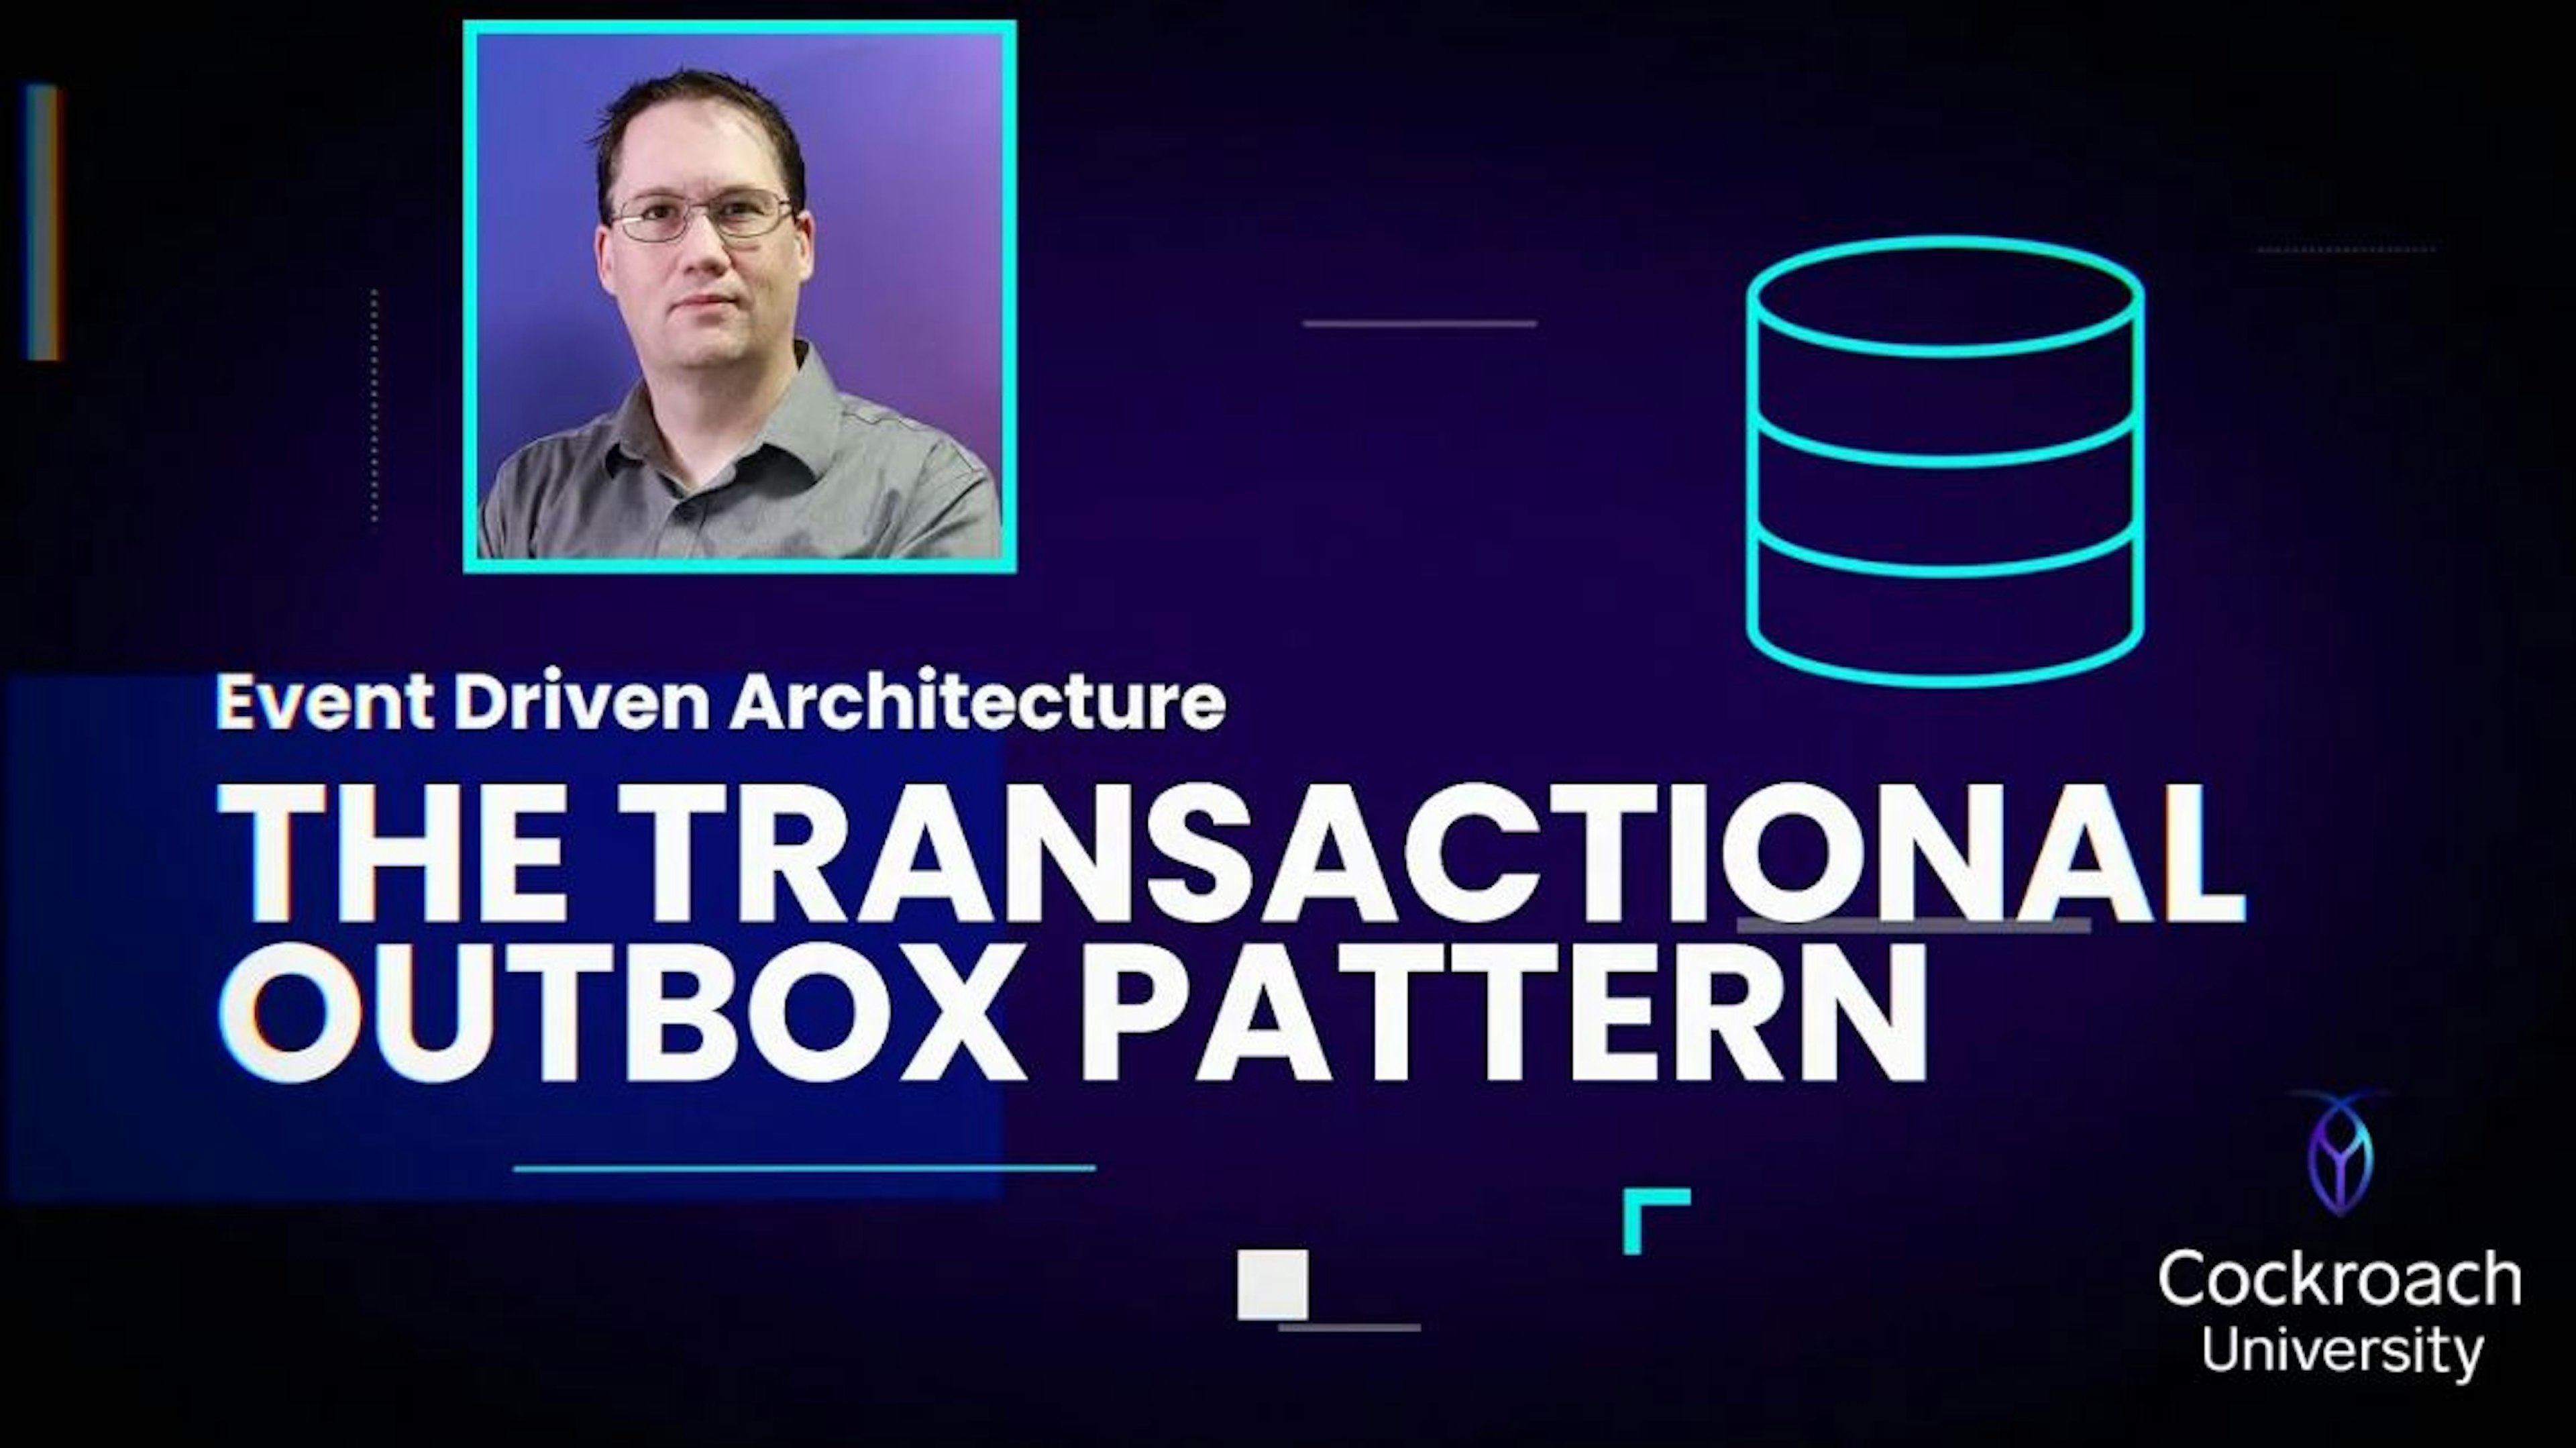 event-driven-architecture-lecture-02-transactional-outbox-pattern